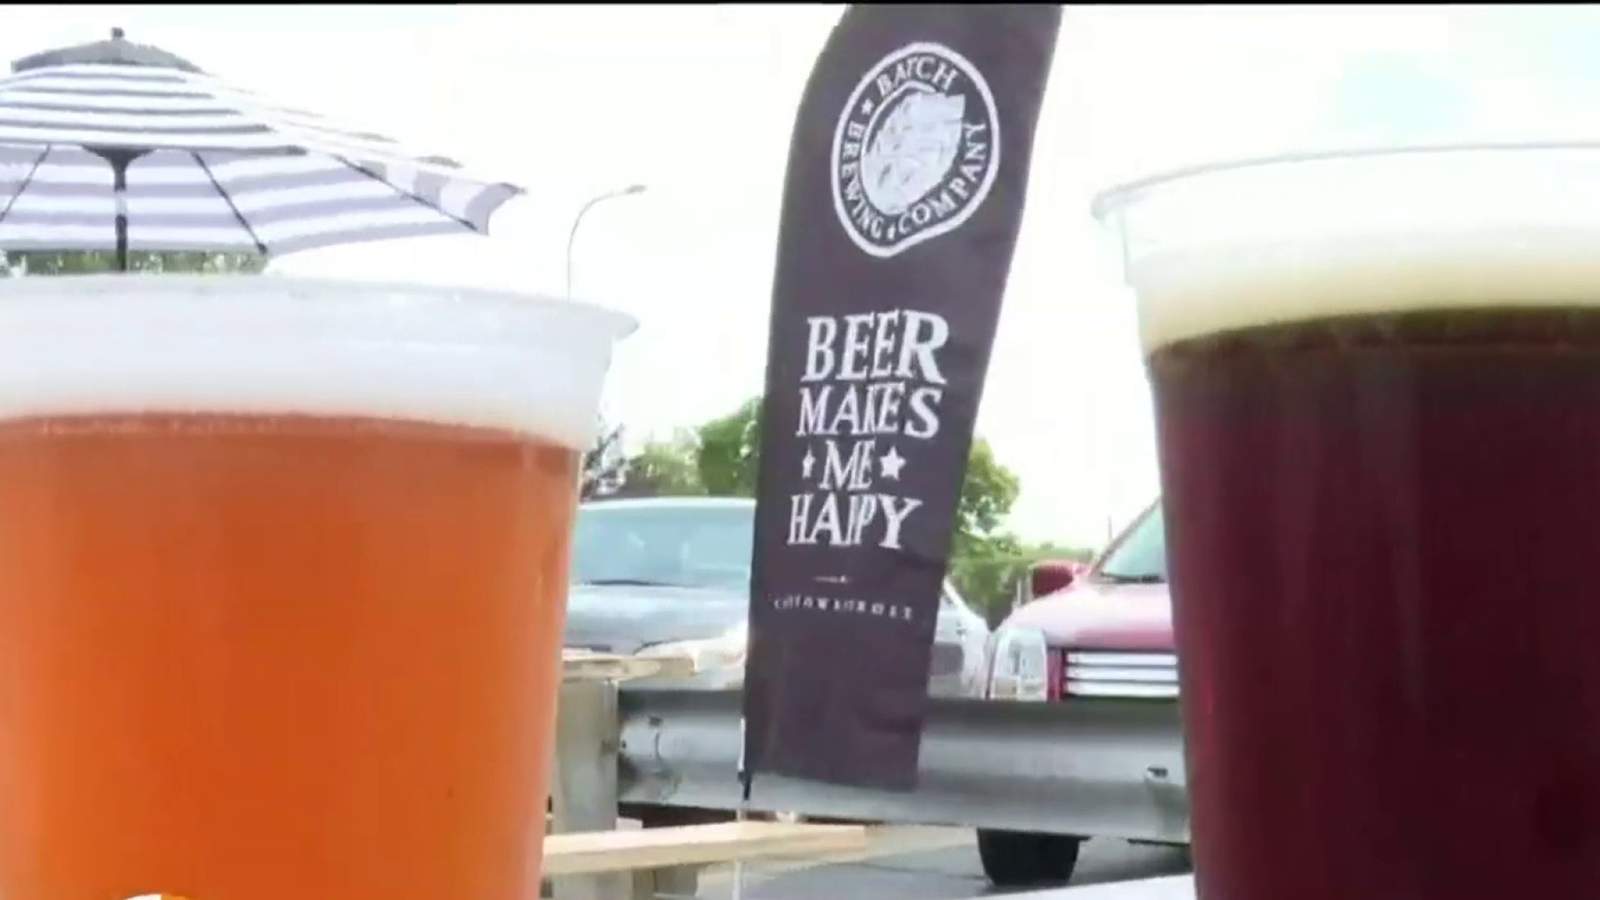 Say cheers to International Beer Day at this Detroit Brewery